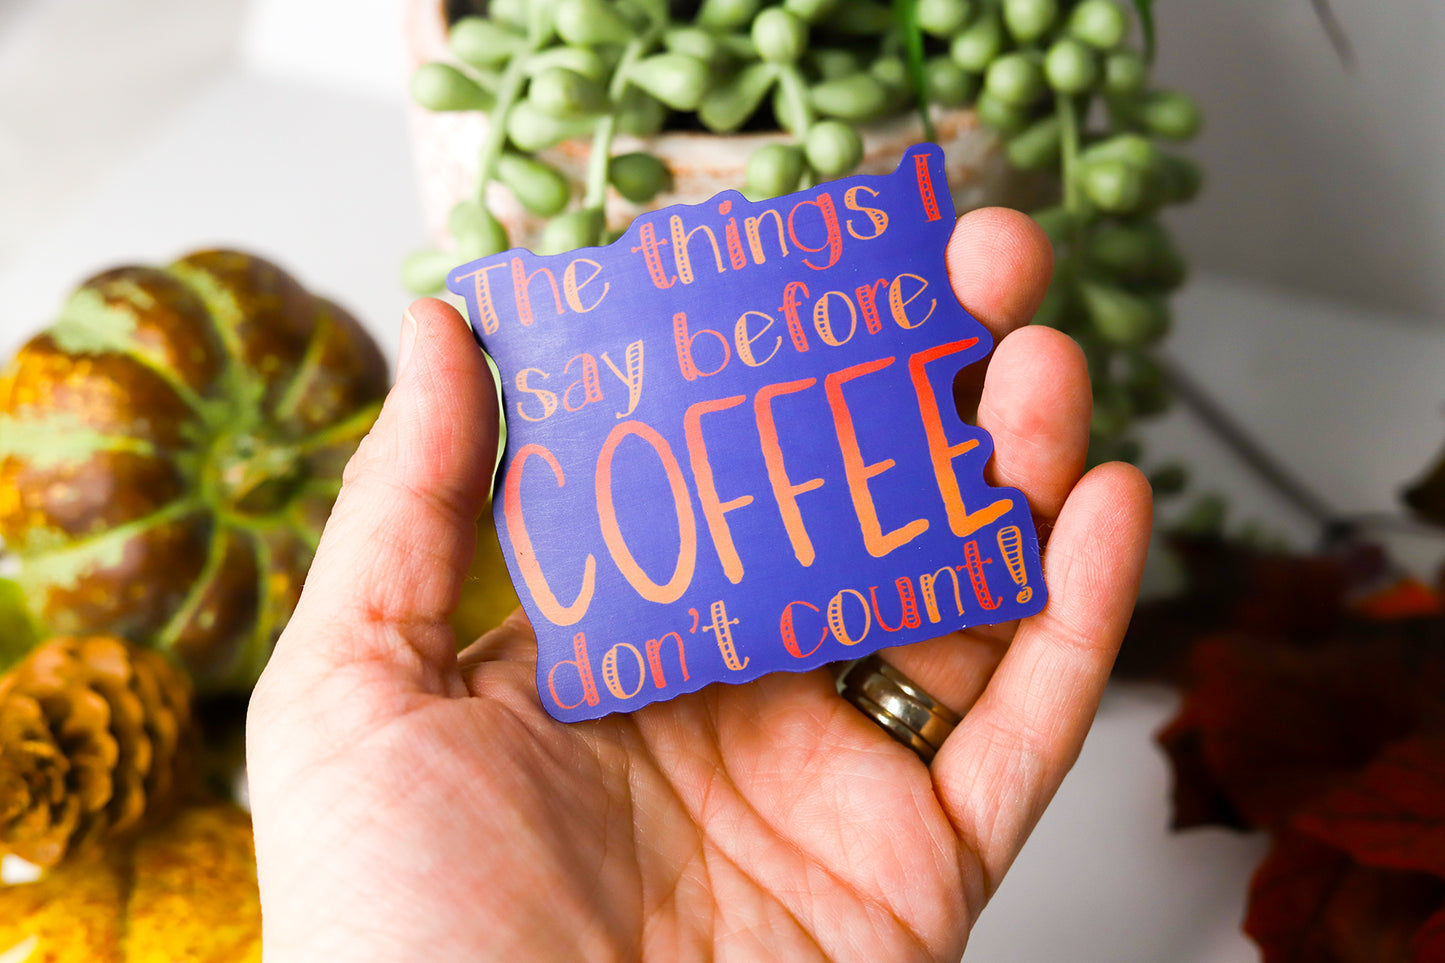 The Things I Say Before Coffee Sticker